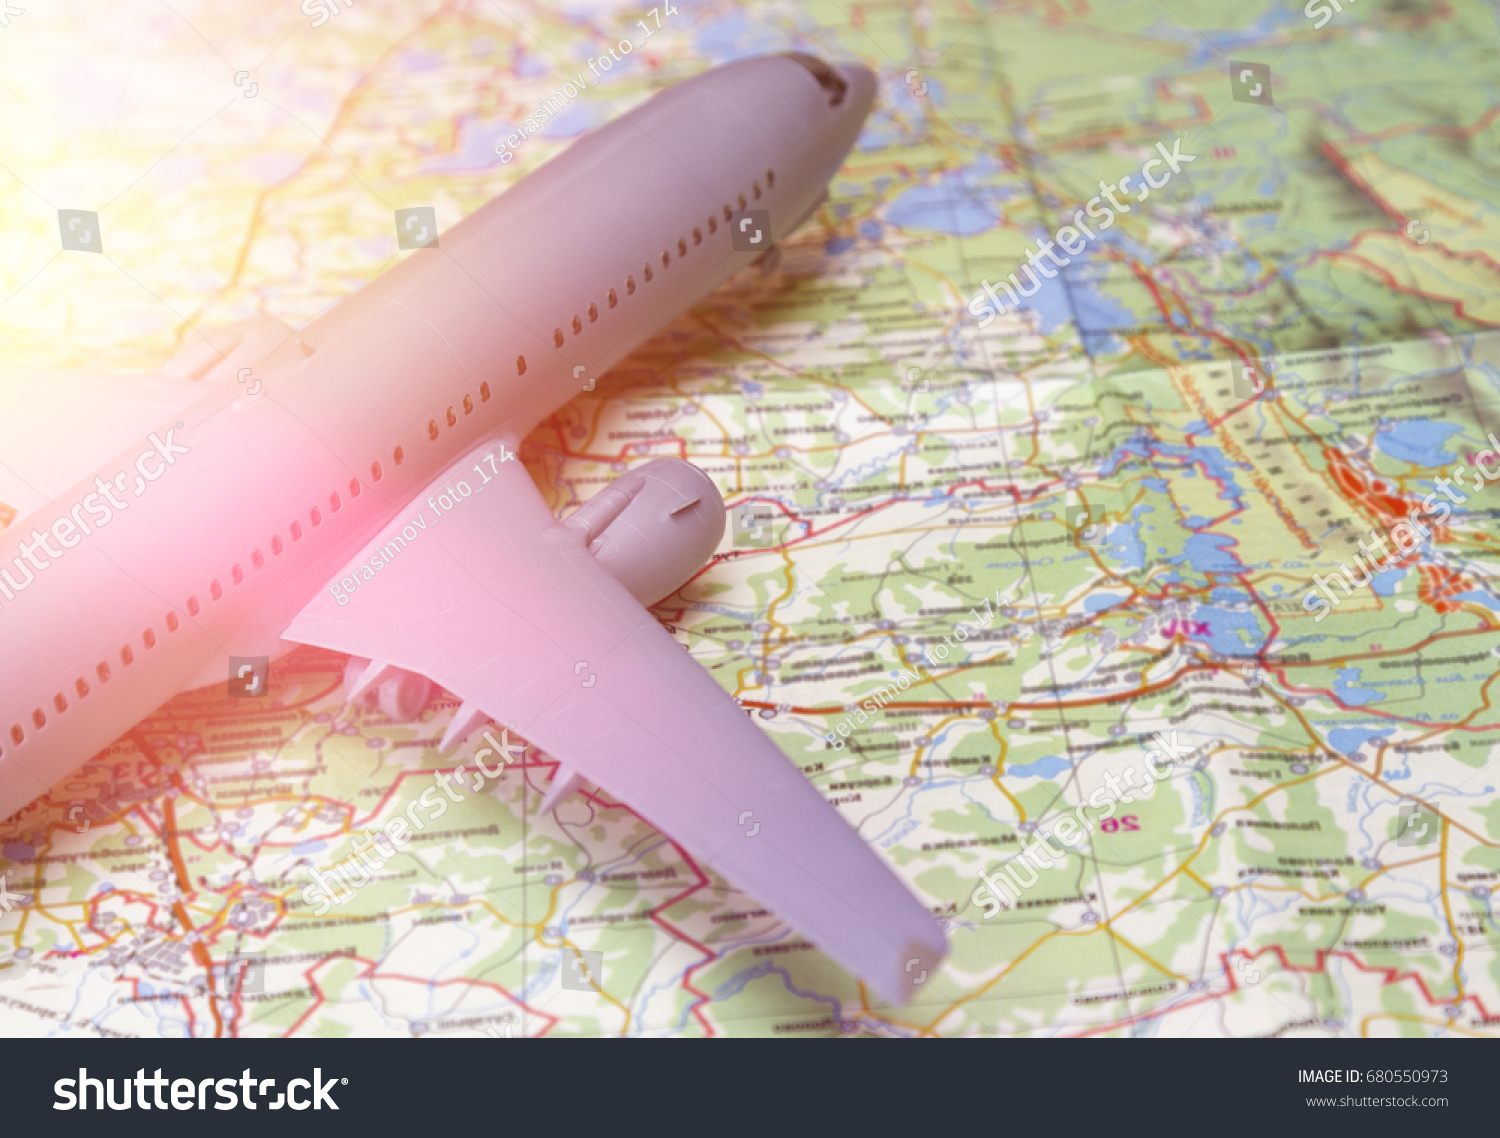 Plane on the map. Traveling abroad, international flights, flight, airlines. In the rays of sunset #680550973